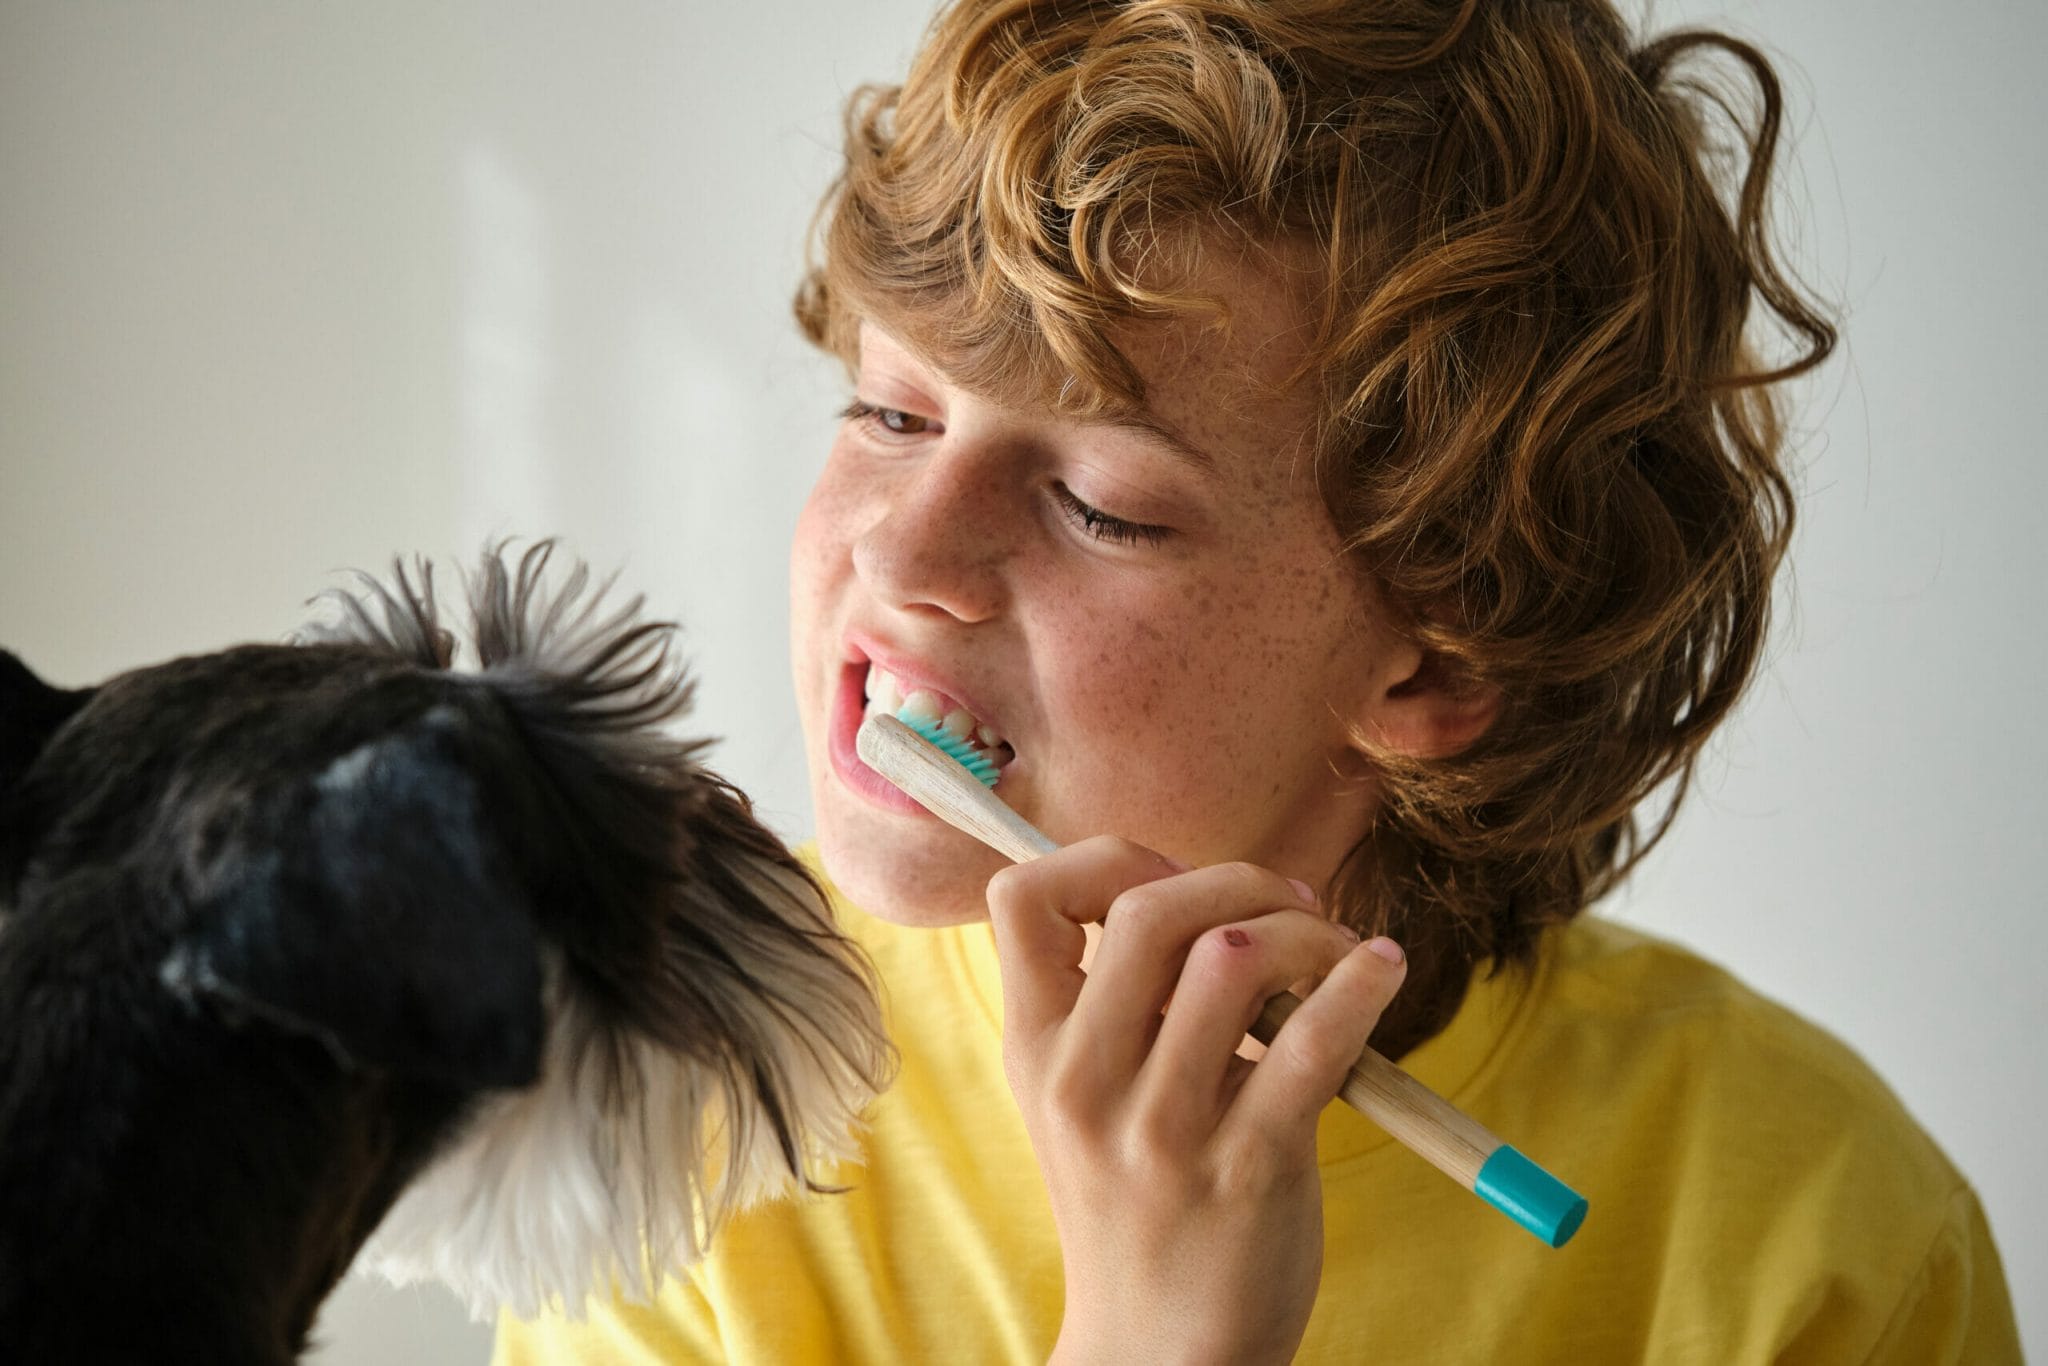 How to brush a dog's teeth that hates being brushed